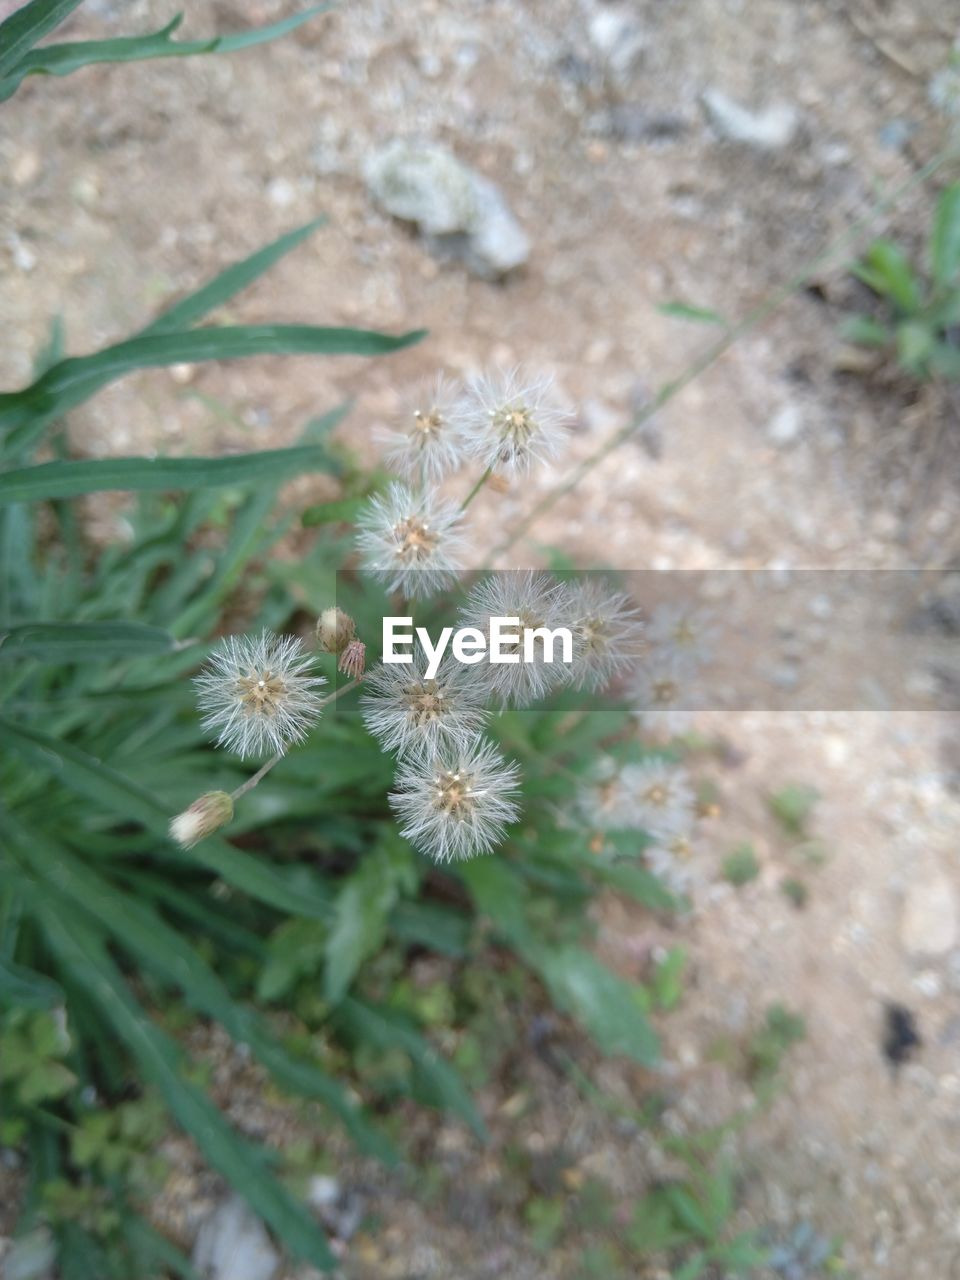 plant, flower, flowering plant, beauty in nature, nature, growth, freshness, fragility, close-up, focus on foreground, no people, day, wildflower, high angle view, land, inflorescence, flower head, outdoors, field, botany, green, white